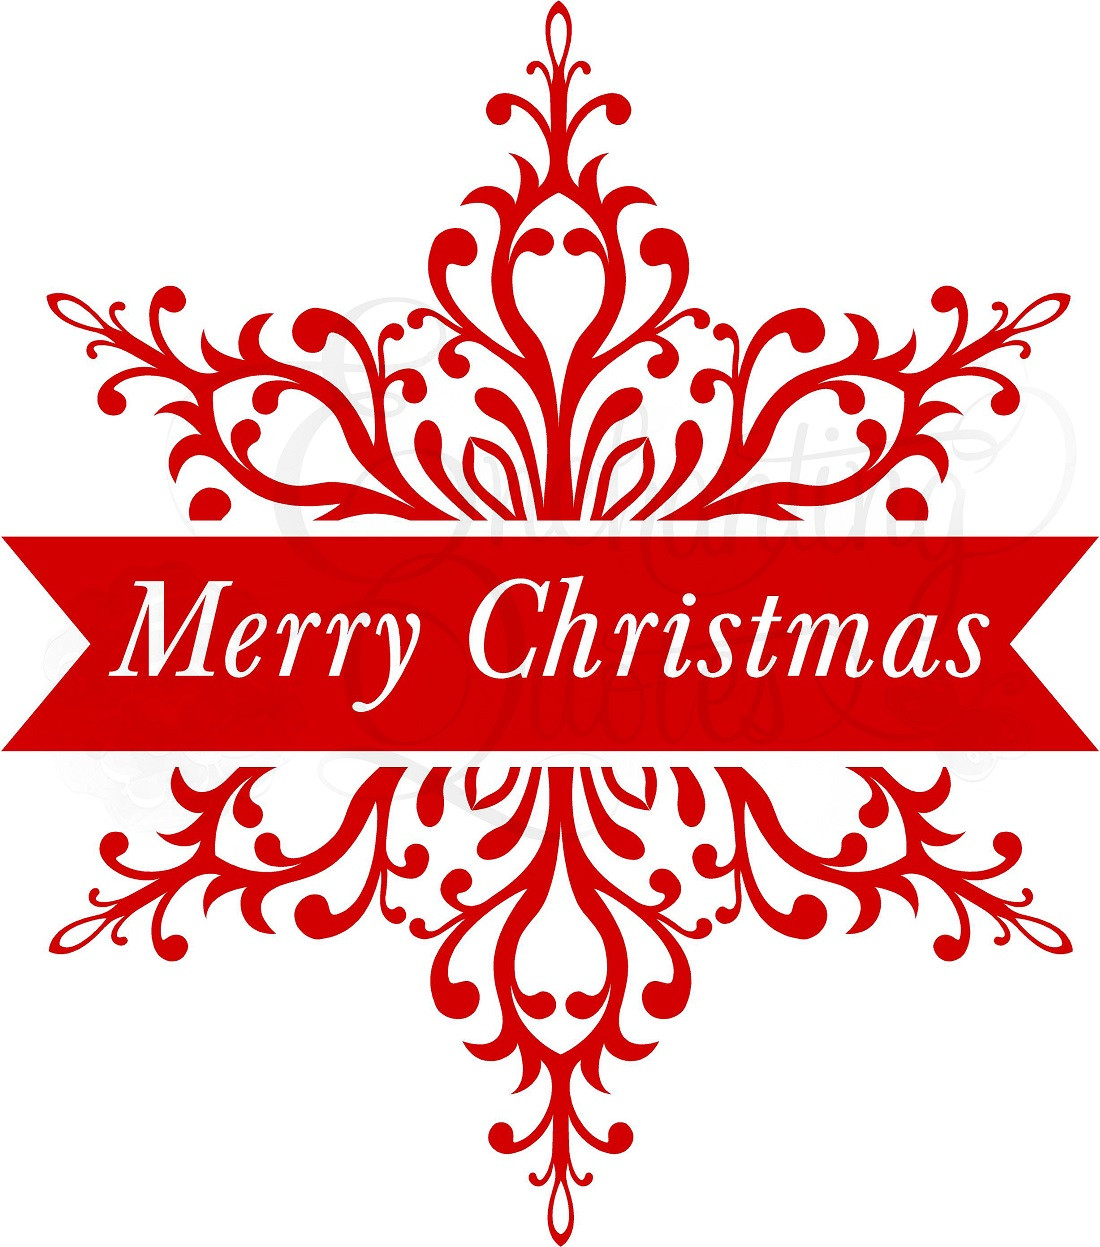 Merry Christmas Quote
 Merry Christmas Quotes QuotesGram